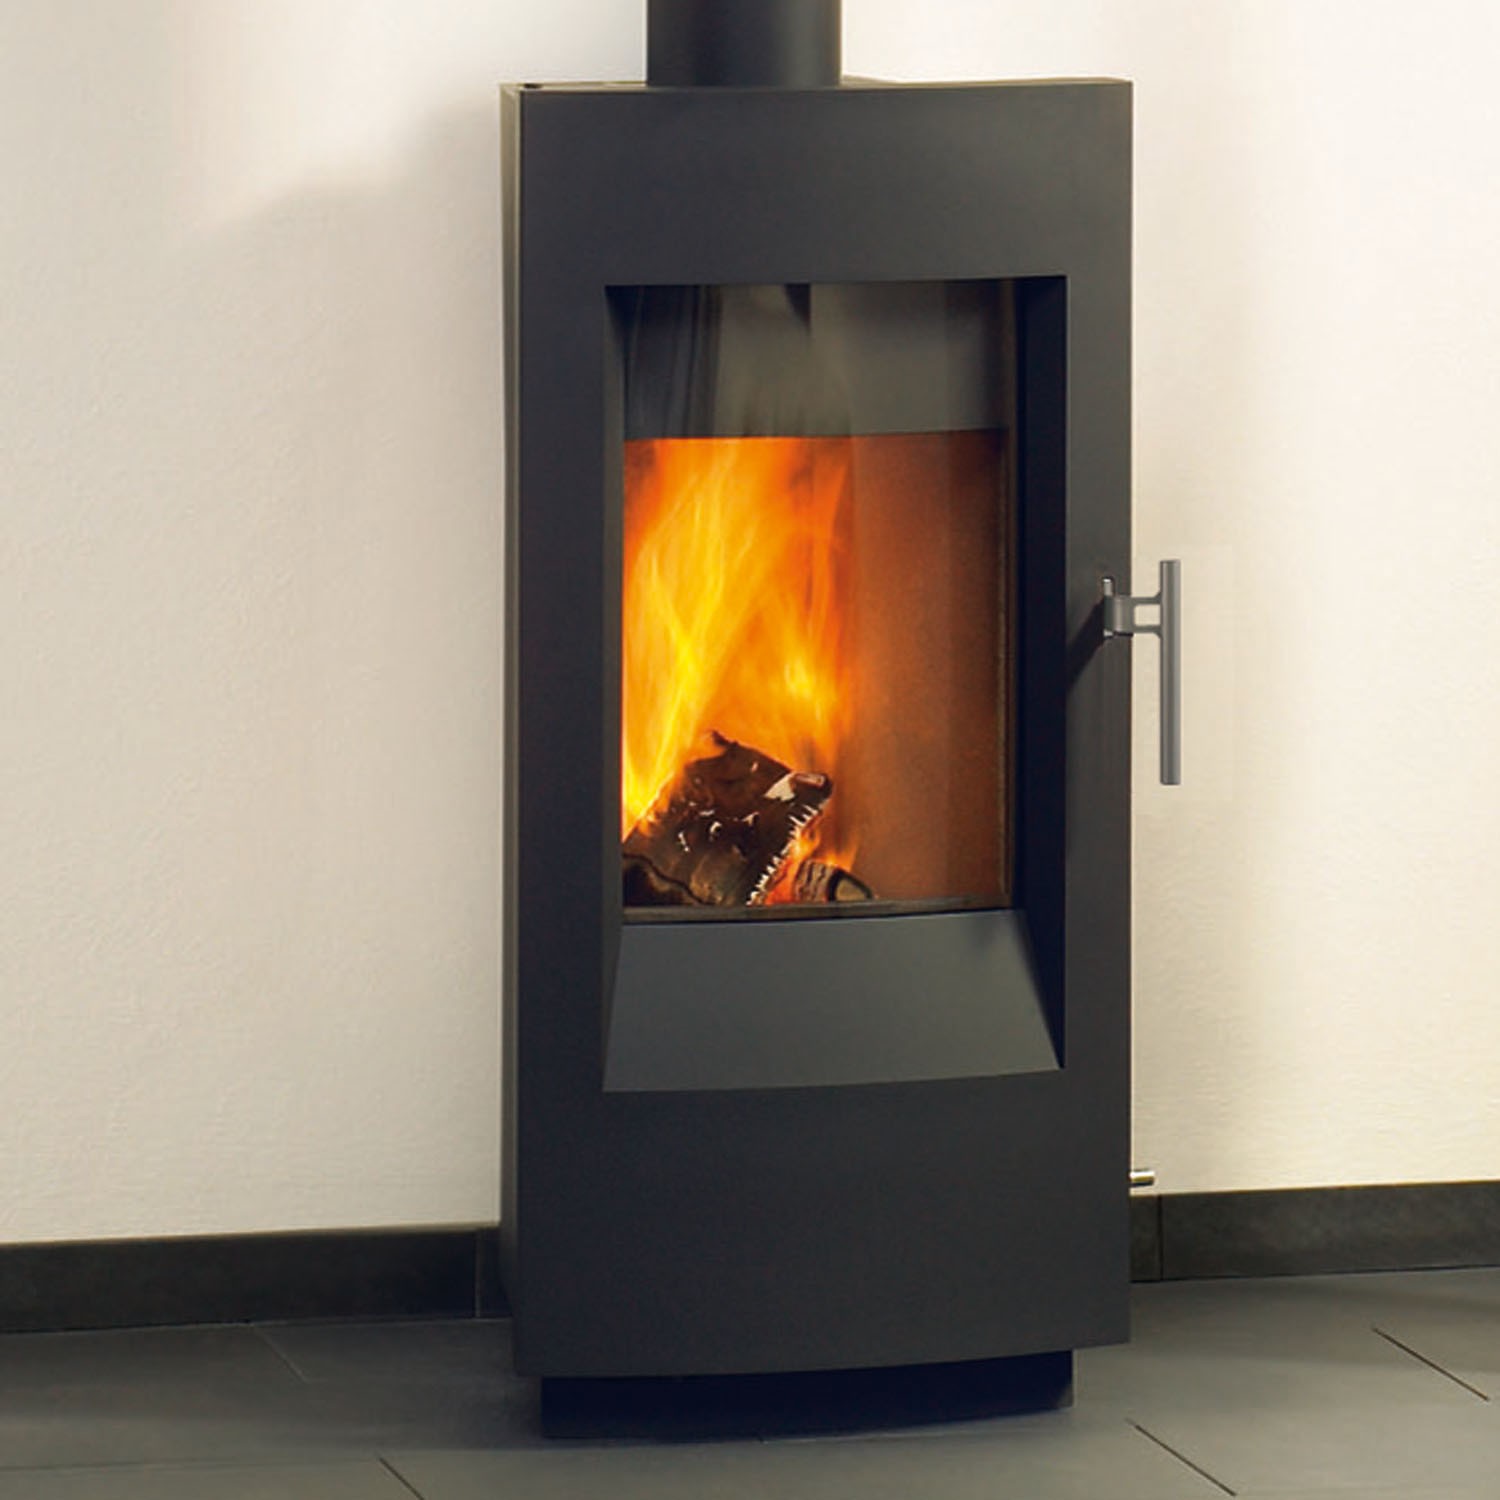 Tula 8190 Wood Stove black modern glass front with handle on tile floor and white wall in the background.